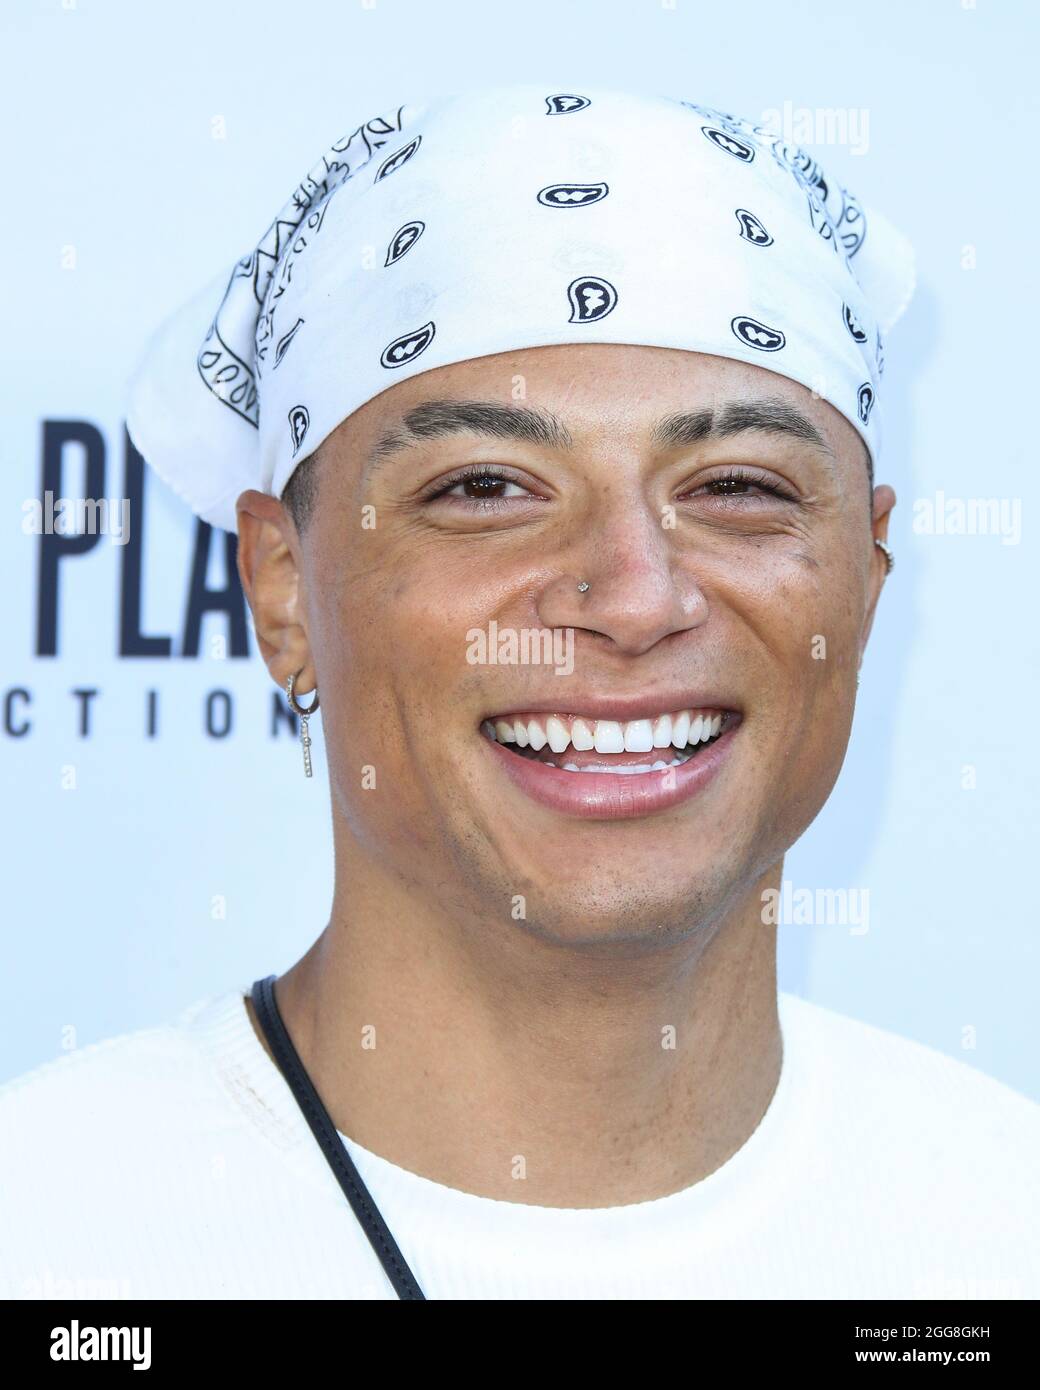 Beverly Hills, United States. 29th Aug, 2021. BEVERLY HILLS, LOS ANGELES, CALIFORNIA, USA - AUGUST 29: Football player/television personality Chase DeMoor arrives at The World's Largest Pizza Festival 2021 held at a Private Residence on August 29, 2021 in Beverly Hills, Los Angeles, California, United States. (Photo by Xavier Collin/Image Press Agency/Sipa USA) Credit: Sipa USA/Alamy Live News Stock Photo